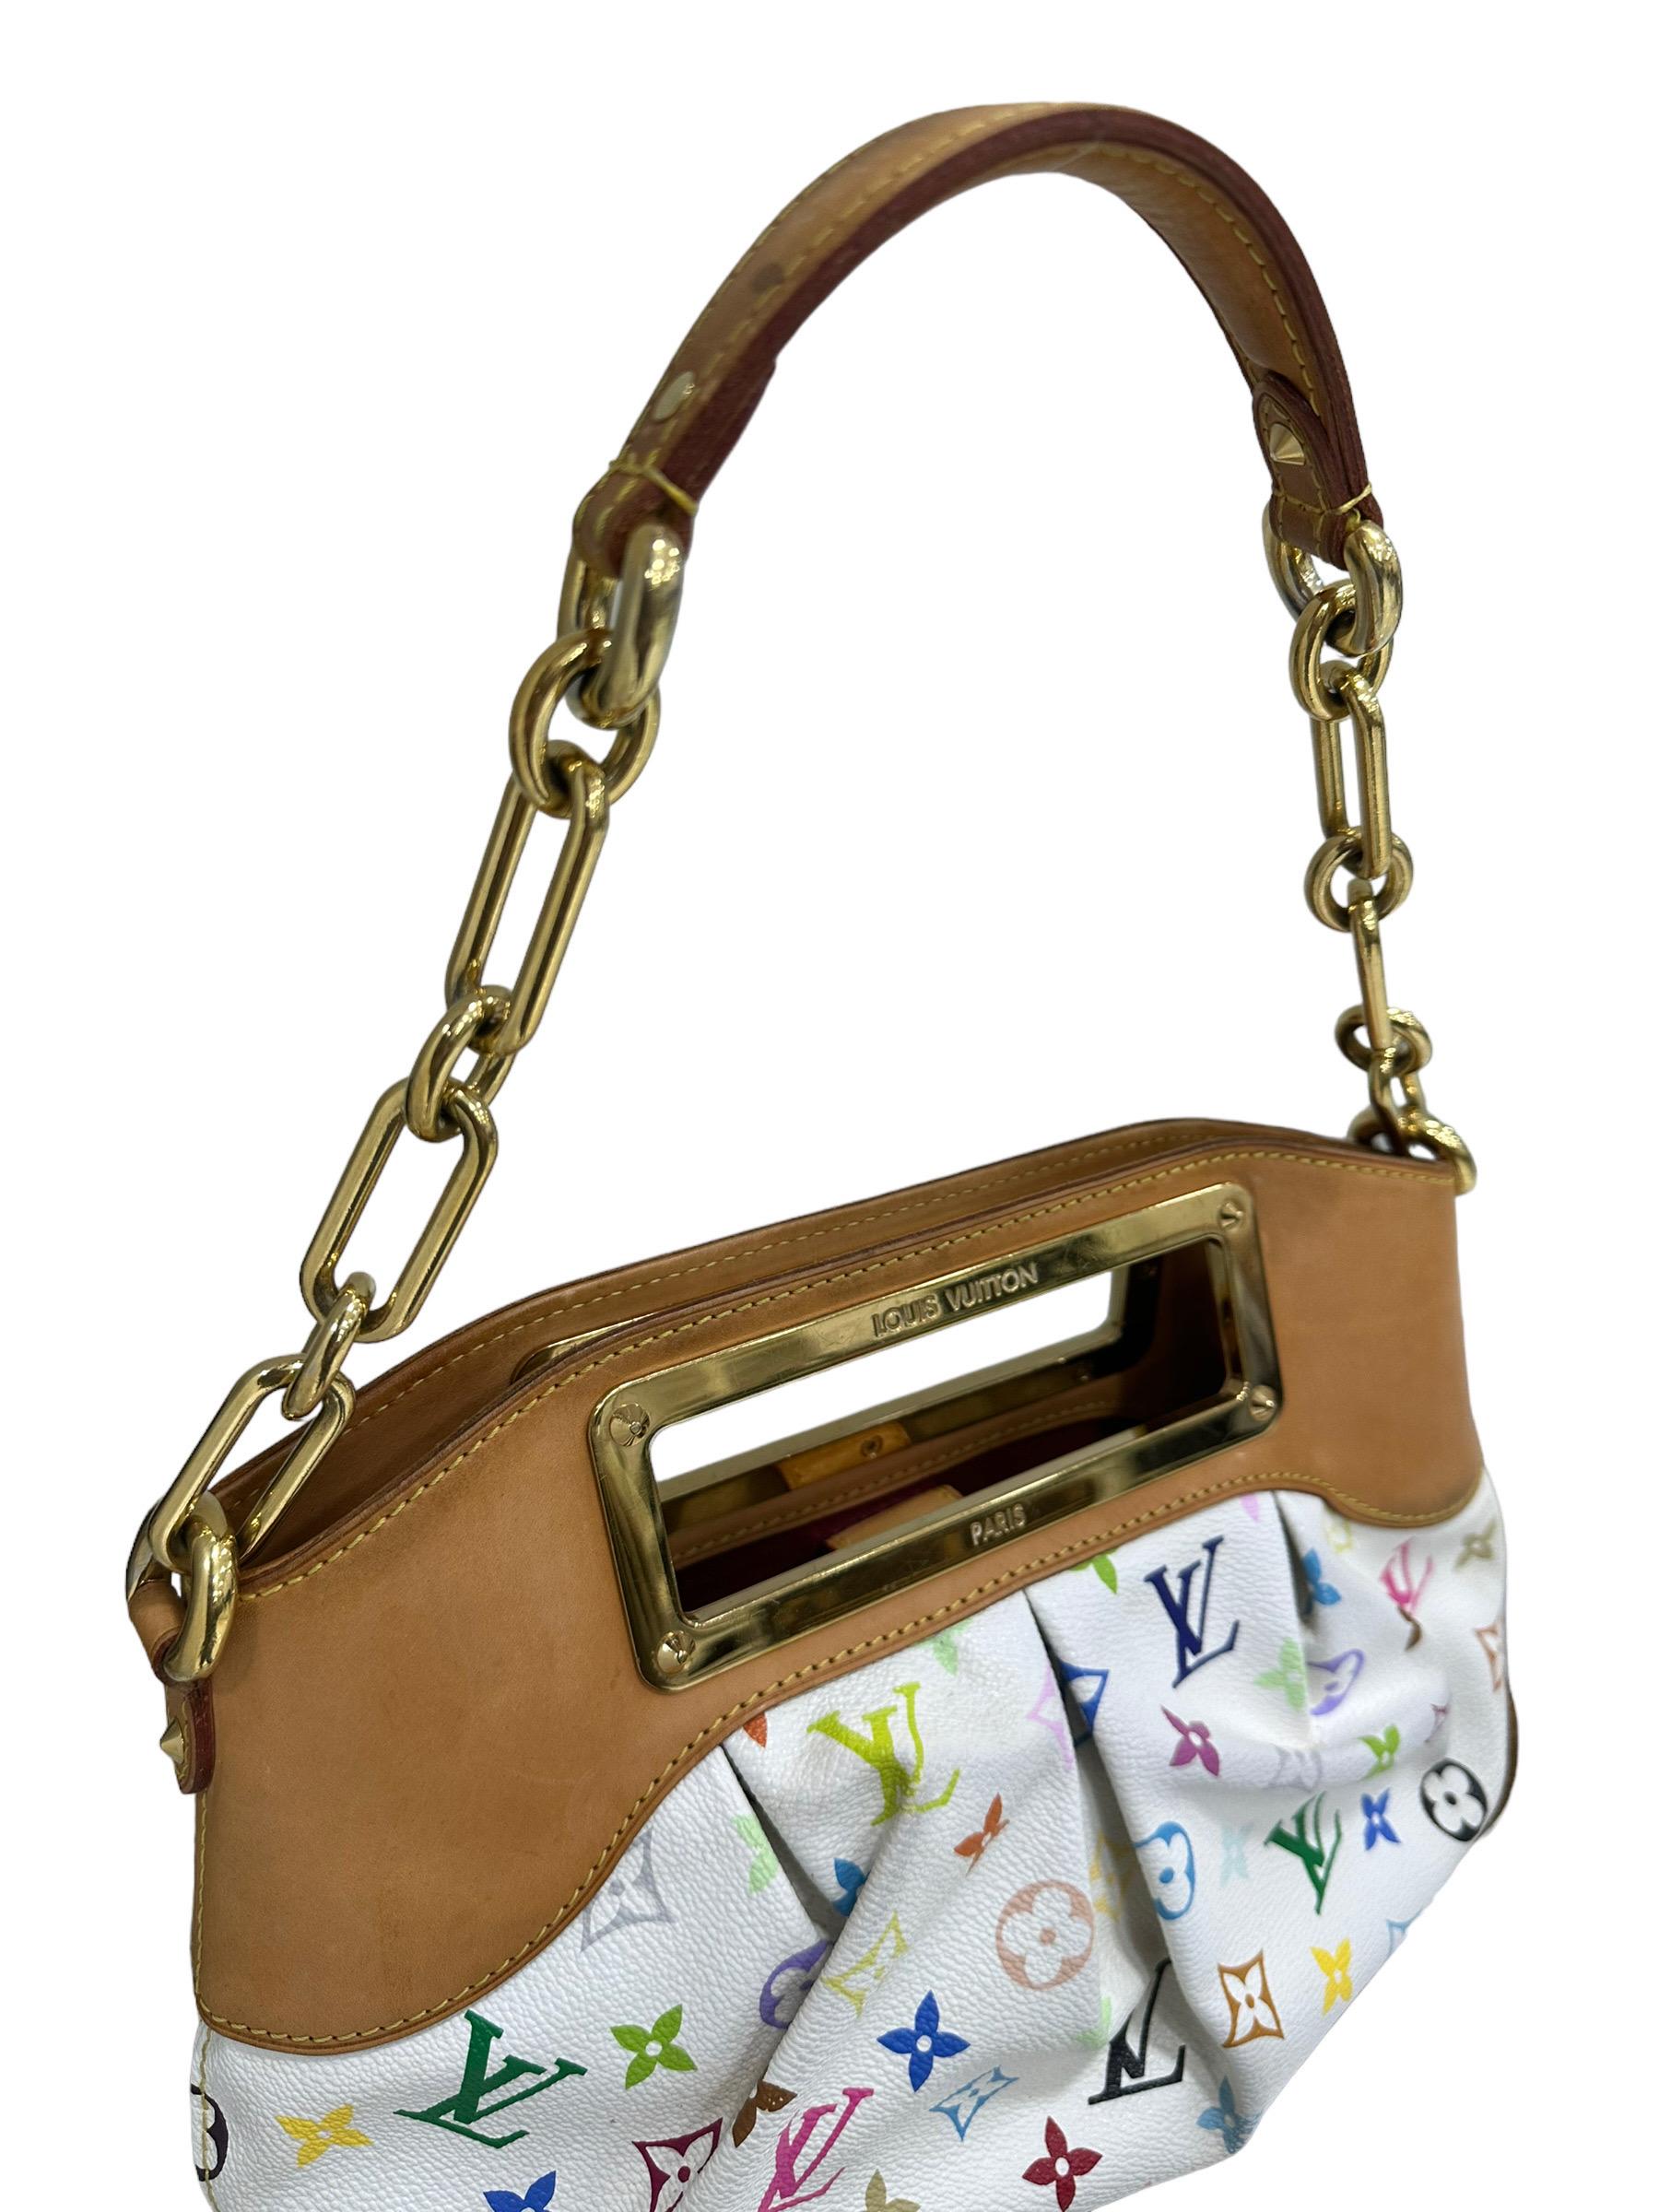 Louis Vuitton x Takashi Murakami Judy PM Limited Edition Shoulder Bag In Good Condition For Sale In Torre Del Greco, IT